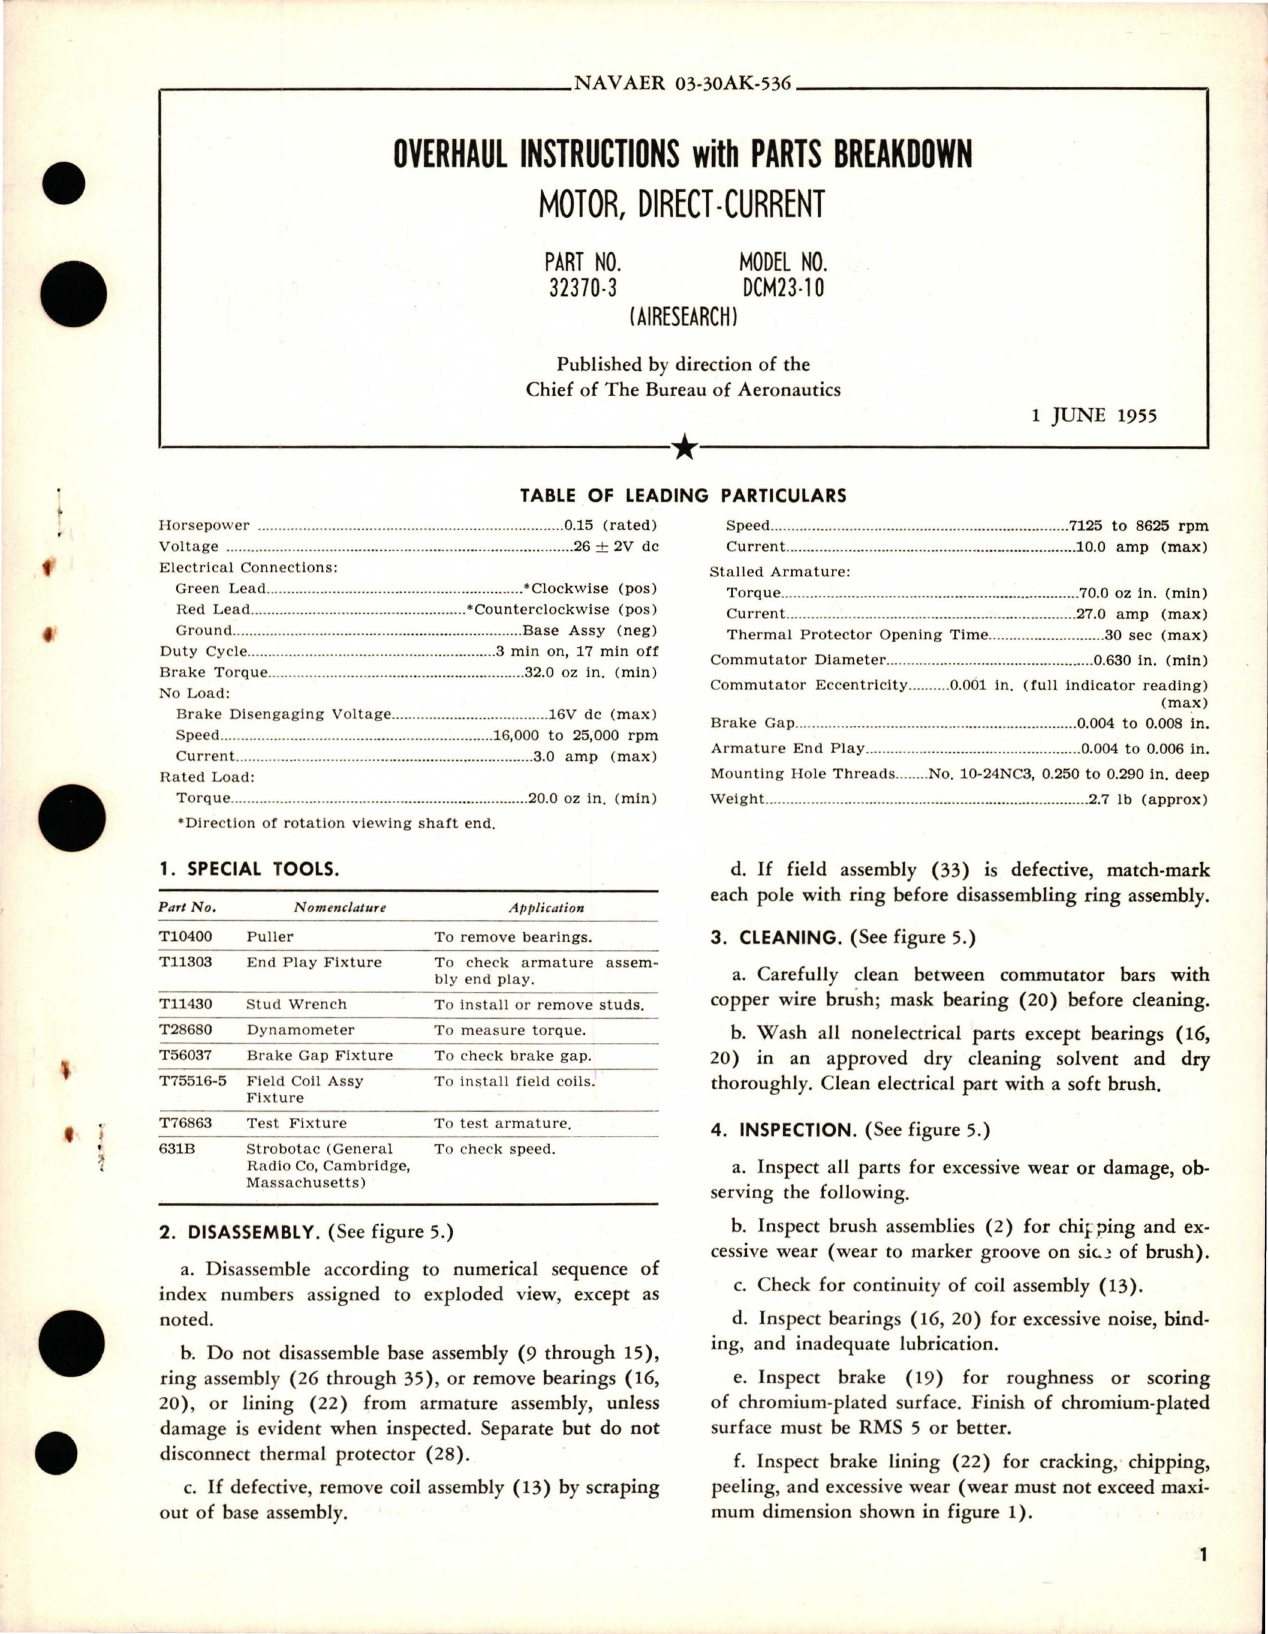 Sample page 1 from AirCorps Library document: Overhaul Instructions with Parts Breakdown for Direct-Current Motor - Part 32370-3 - Model DCM23-10